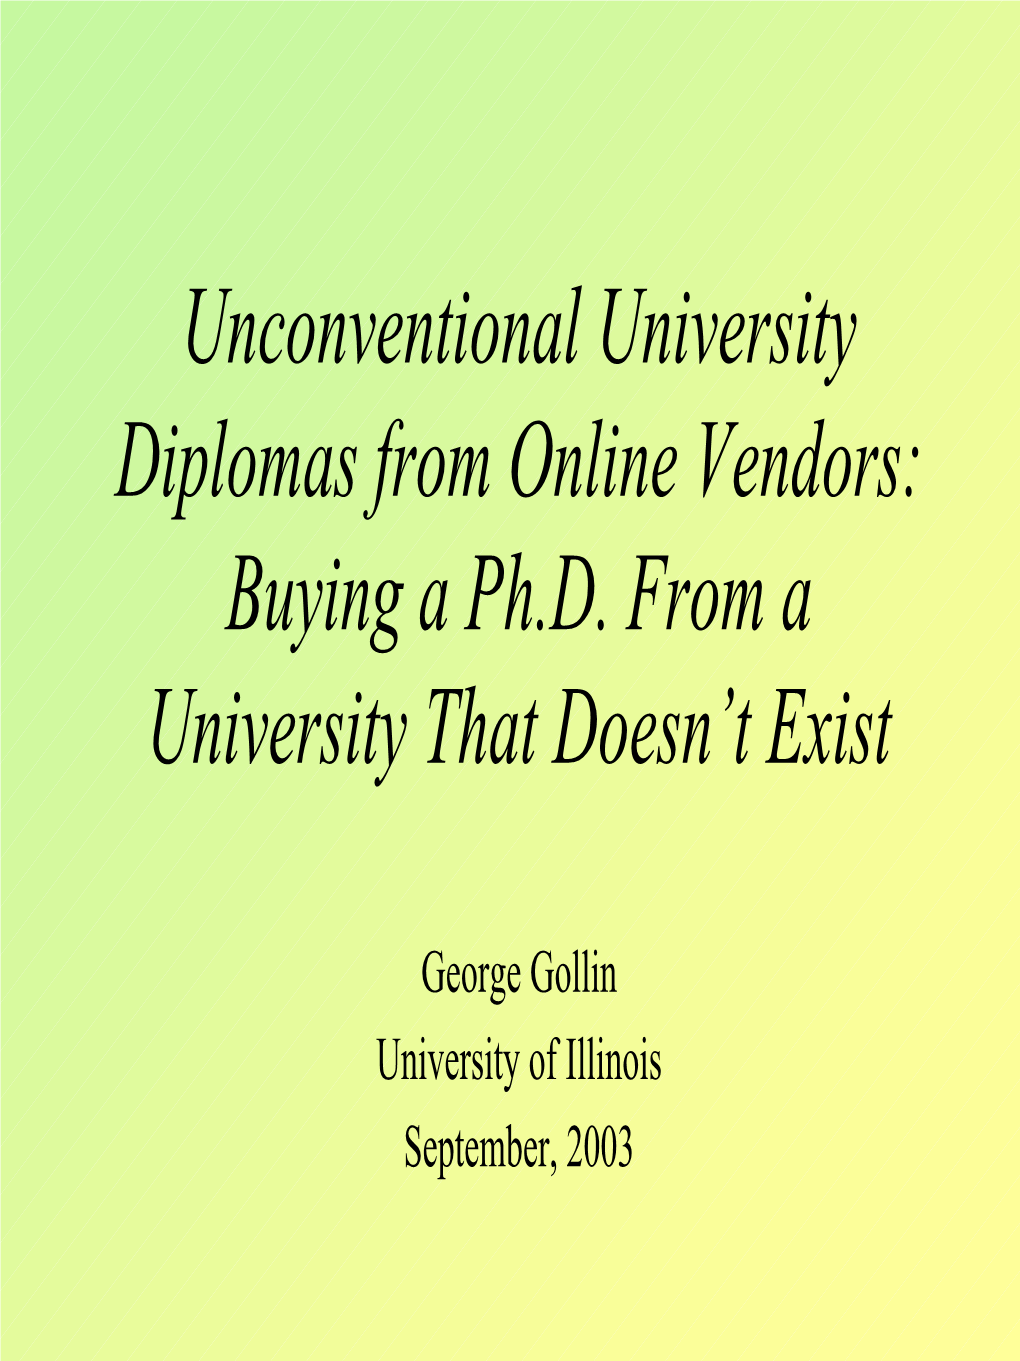 Unconventional University Diplomas from Online Vendors: Buying a Ph.D